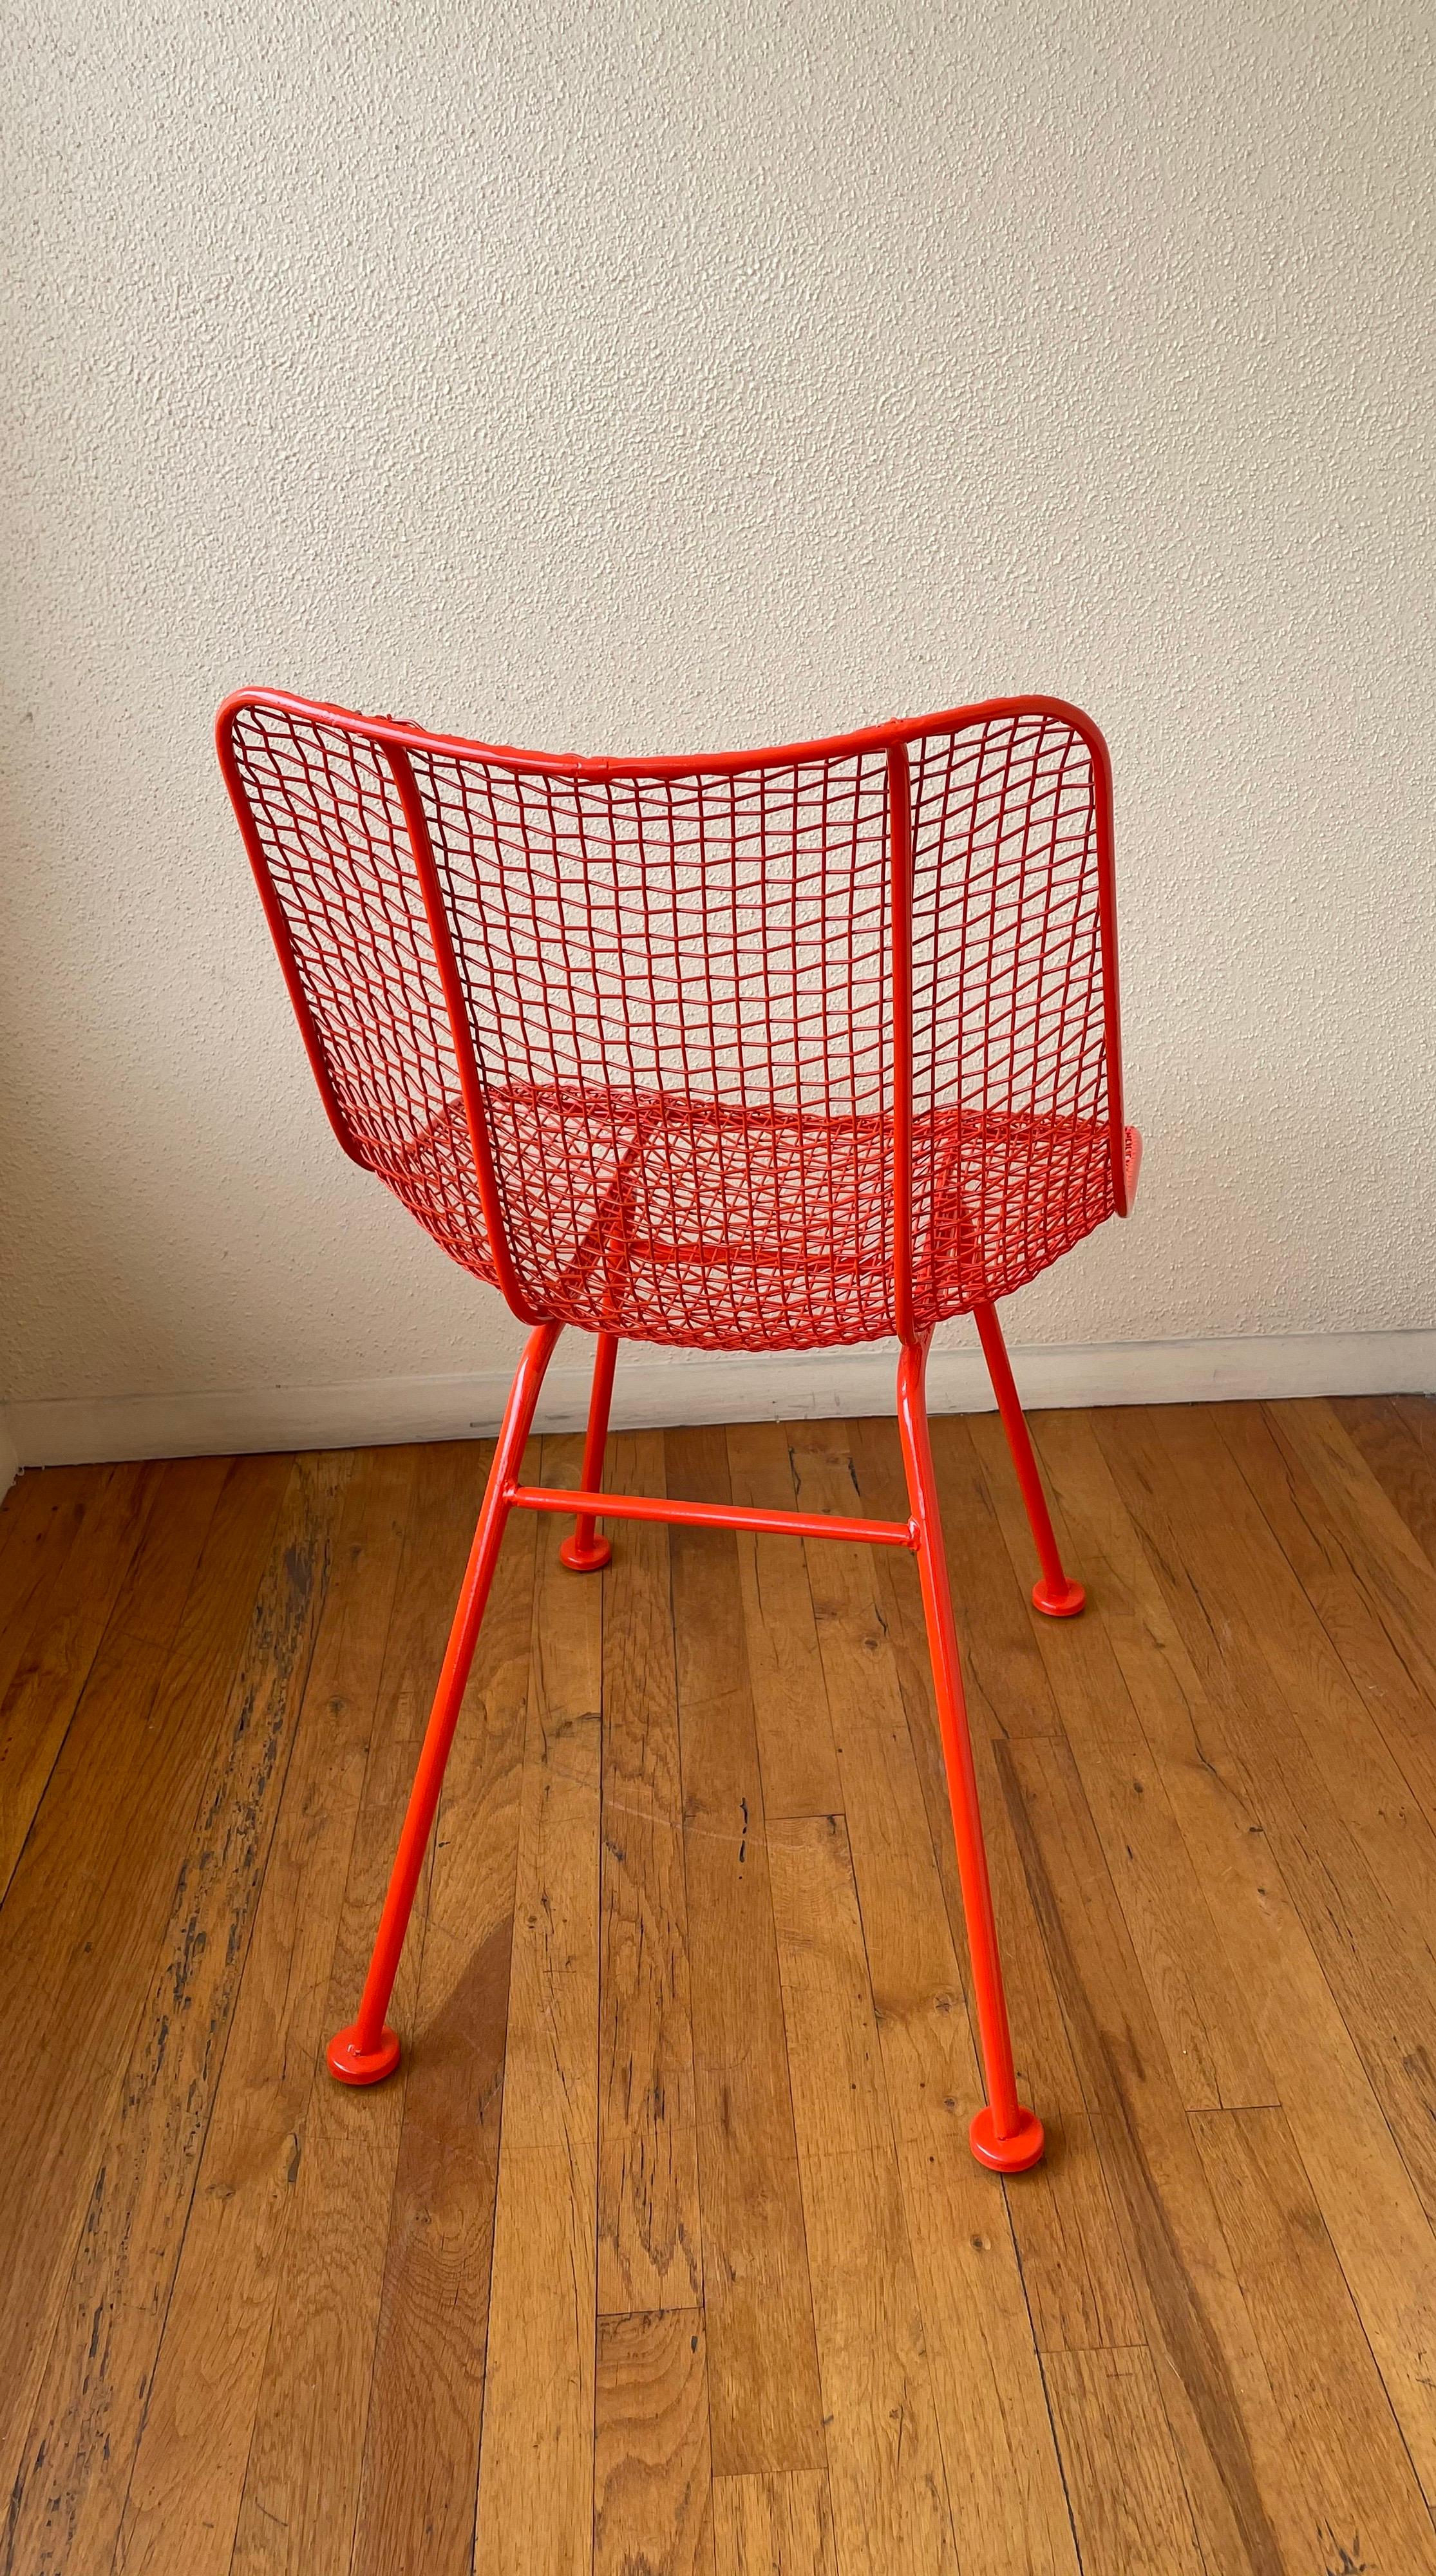 Designed in 1956 the solid iron chair part of the sculptura collection, by Russell Woodard we have this chair freshly powder coated beautiful orange-red finish, Sculptura is inspired by the airiness of wicker but handcrafted in sturdy iron mesh